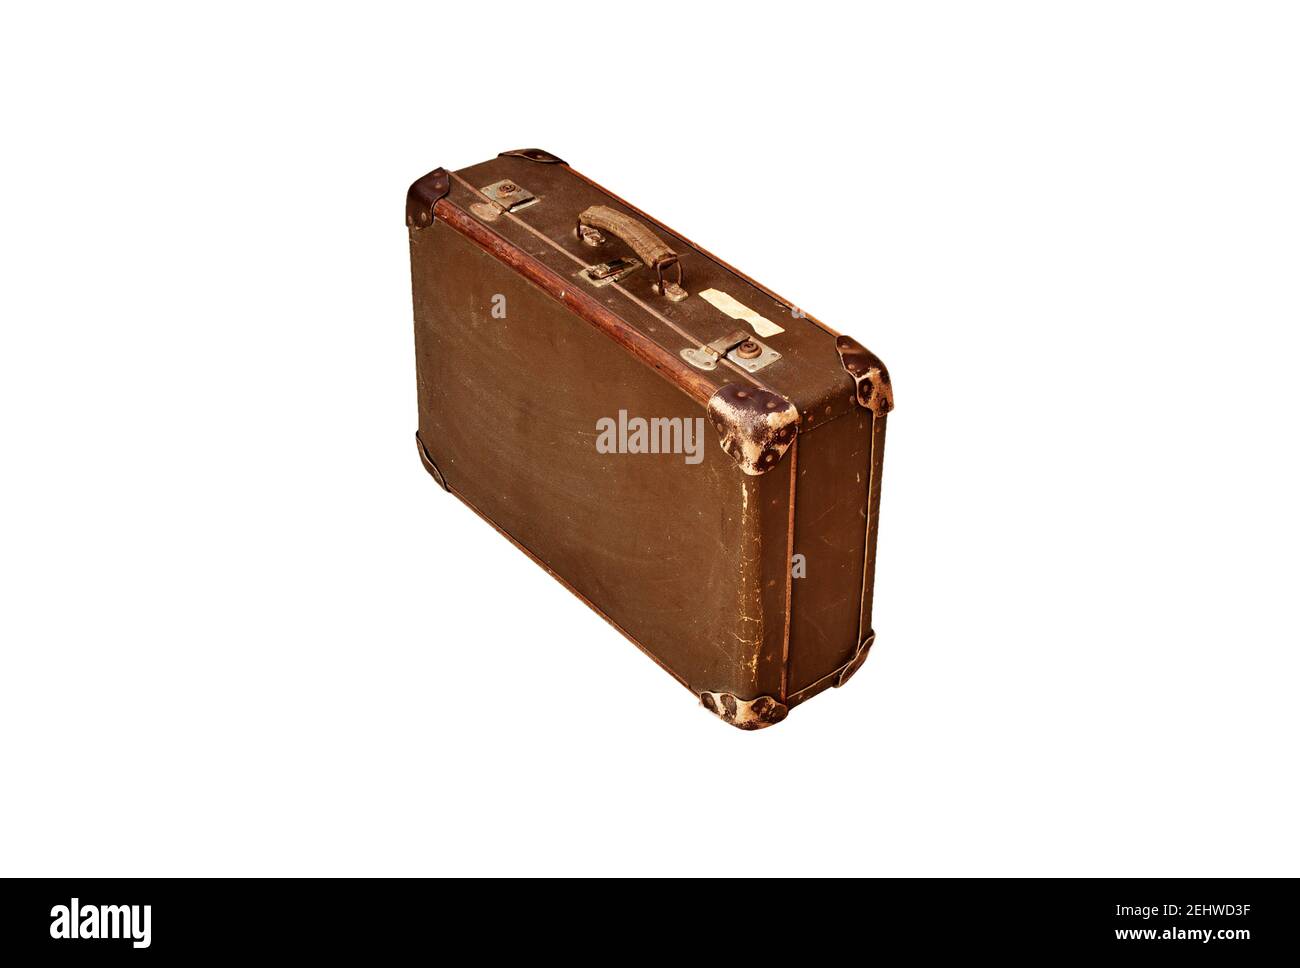 Old leather brown vintage travel suitcase isolated on white background.  Symbol and concept of travel. Adventure time. Stock Photo